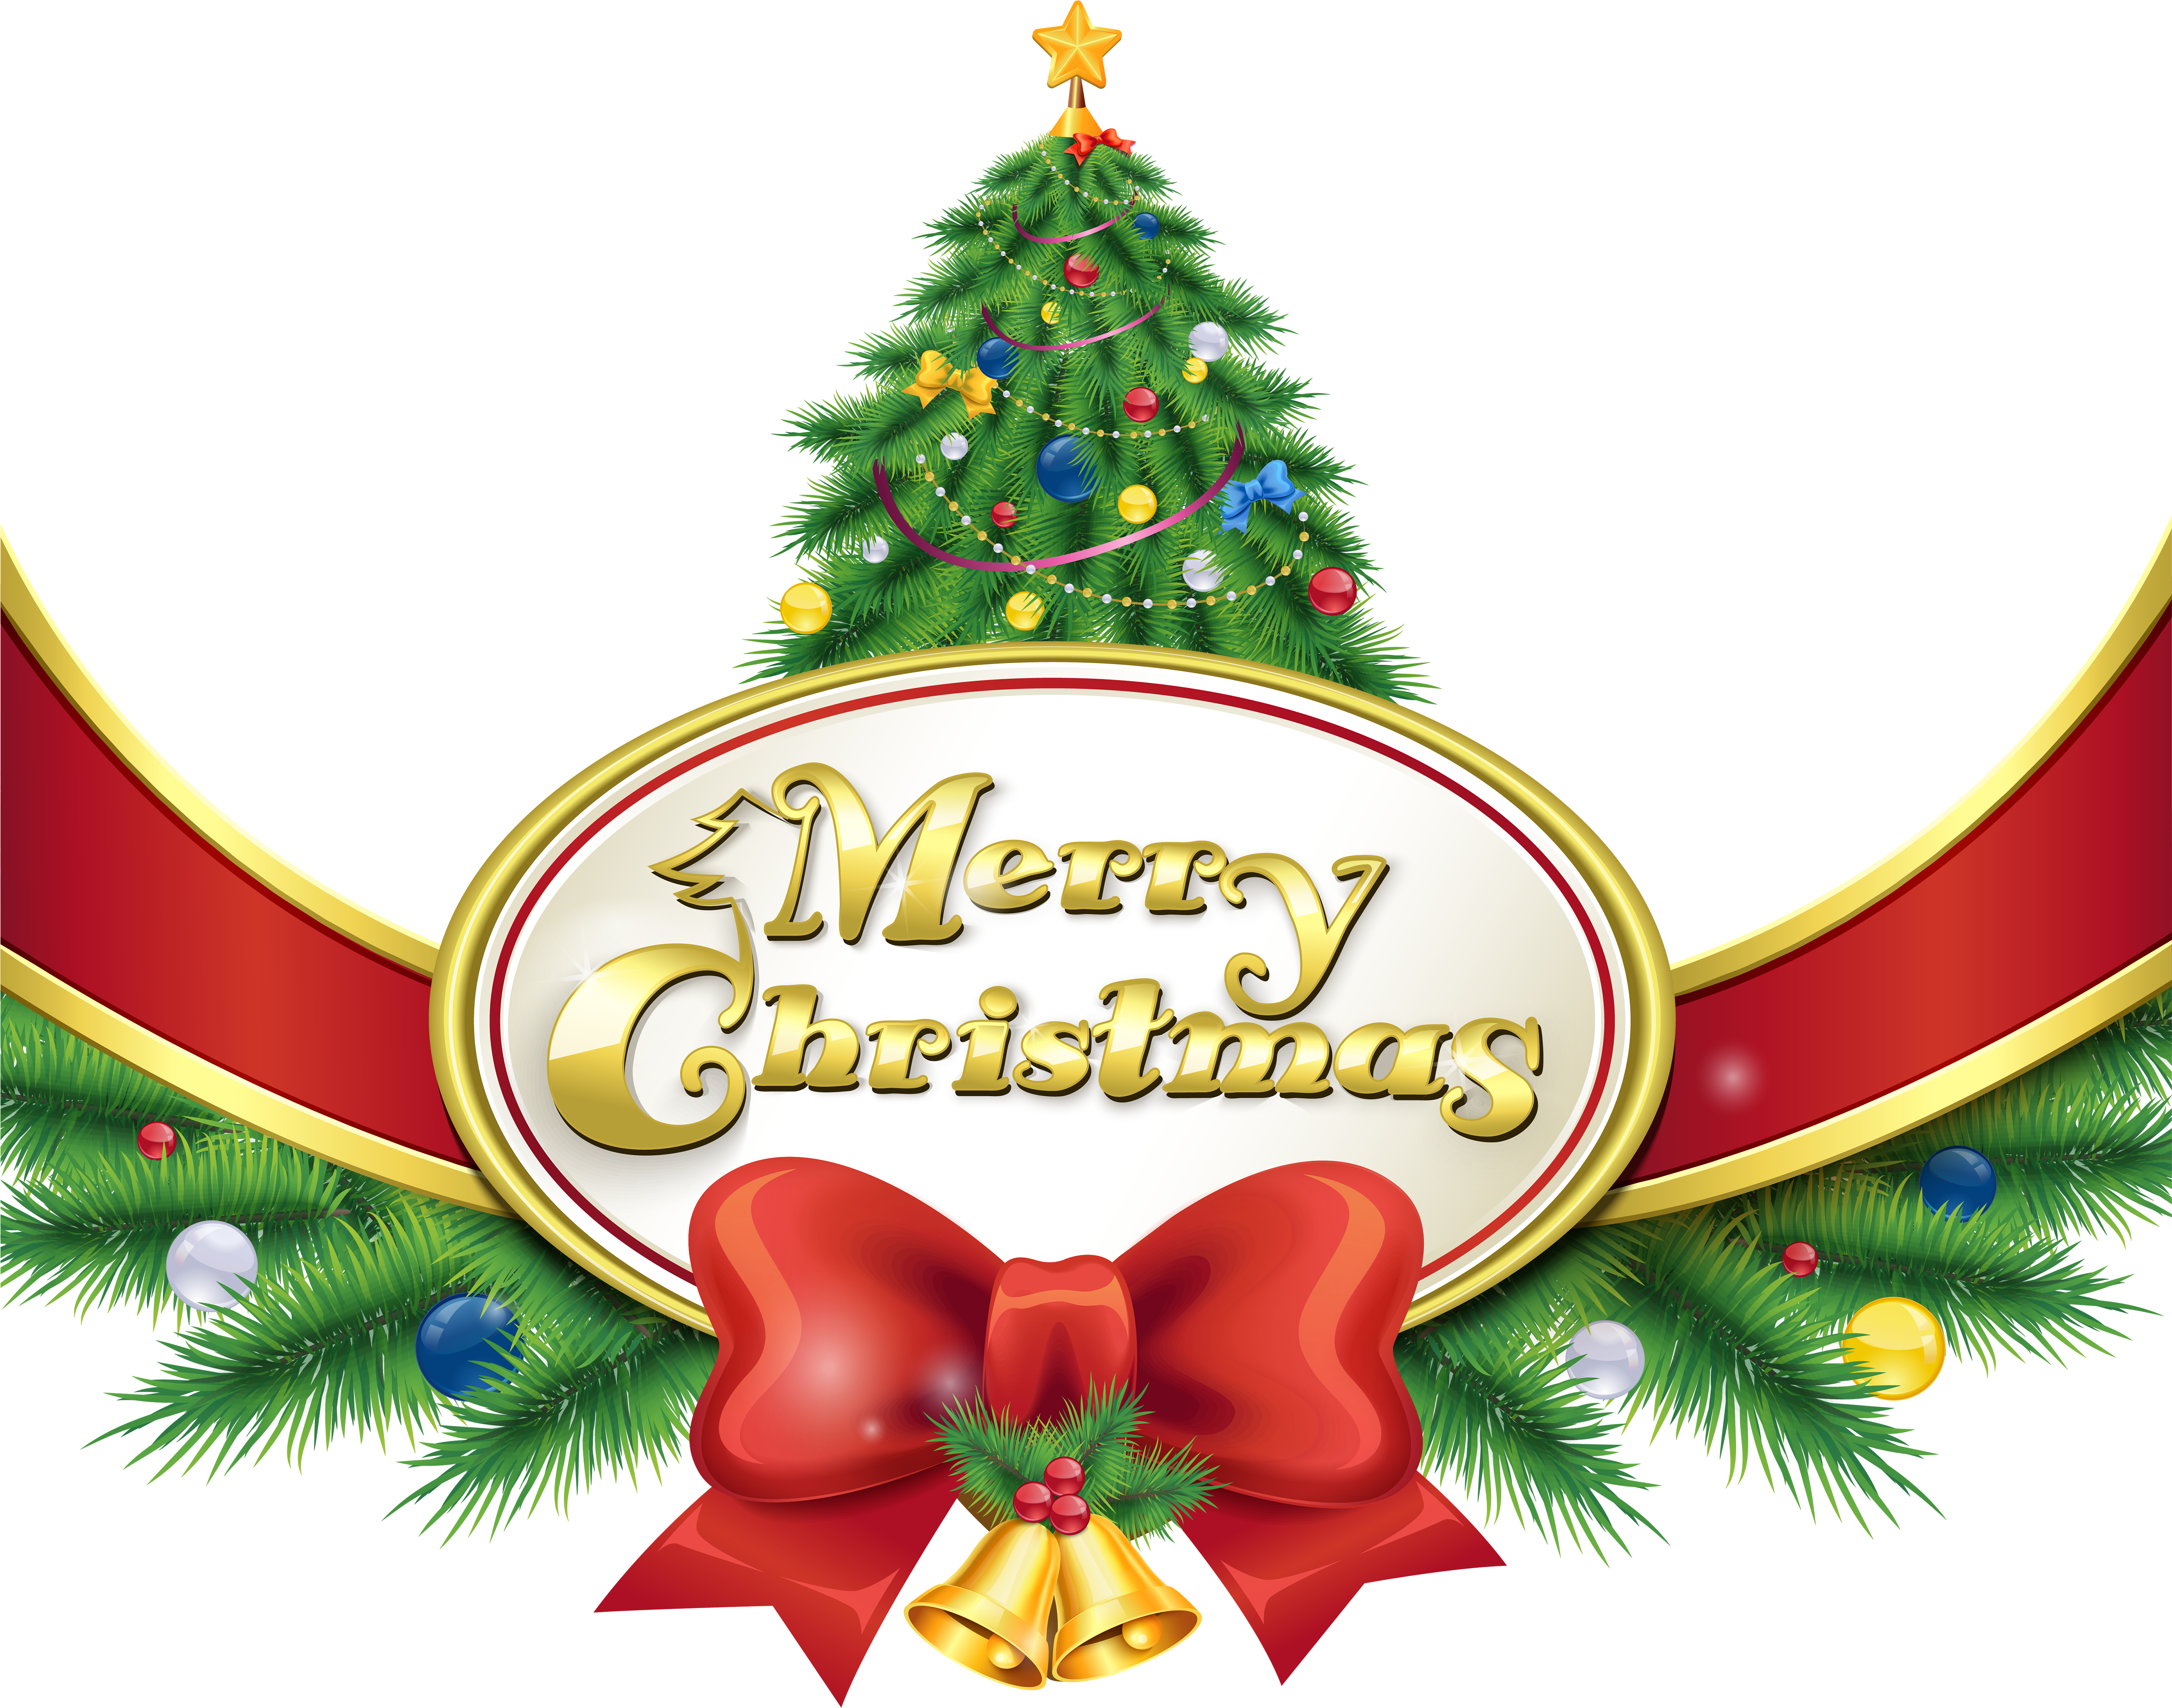 Merry Christmas With Tree And Bow Png Clipart Imageu200b - Christmas Tree Merry Christmas (5000x4046)